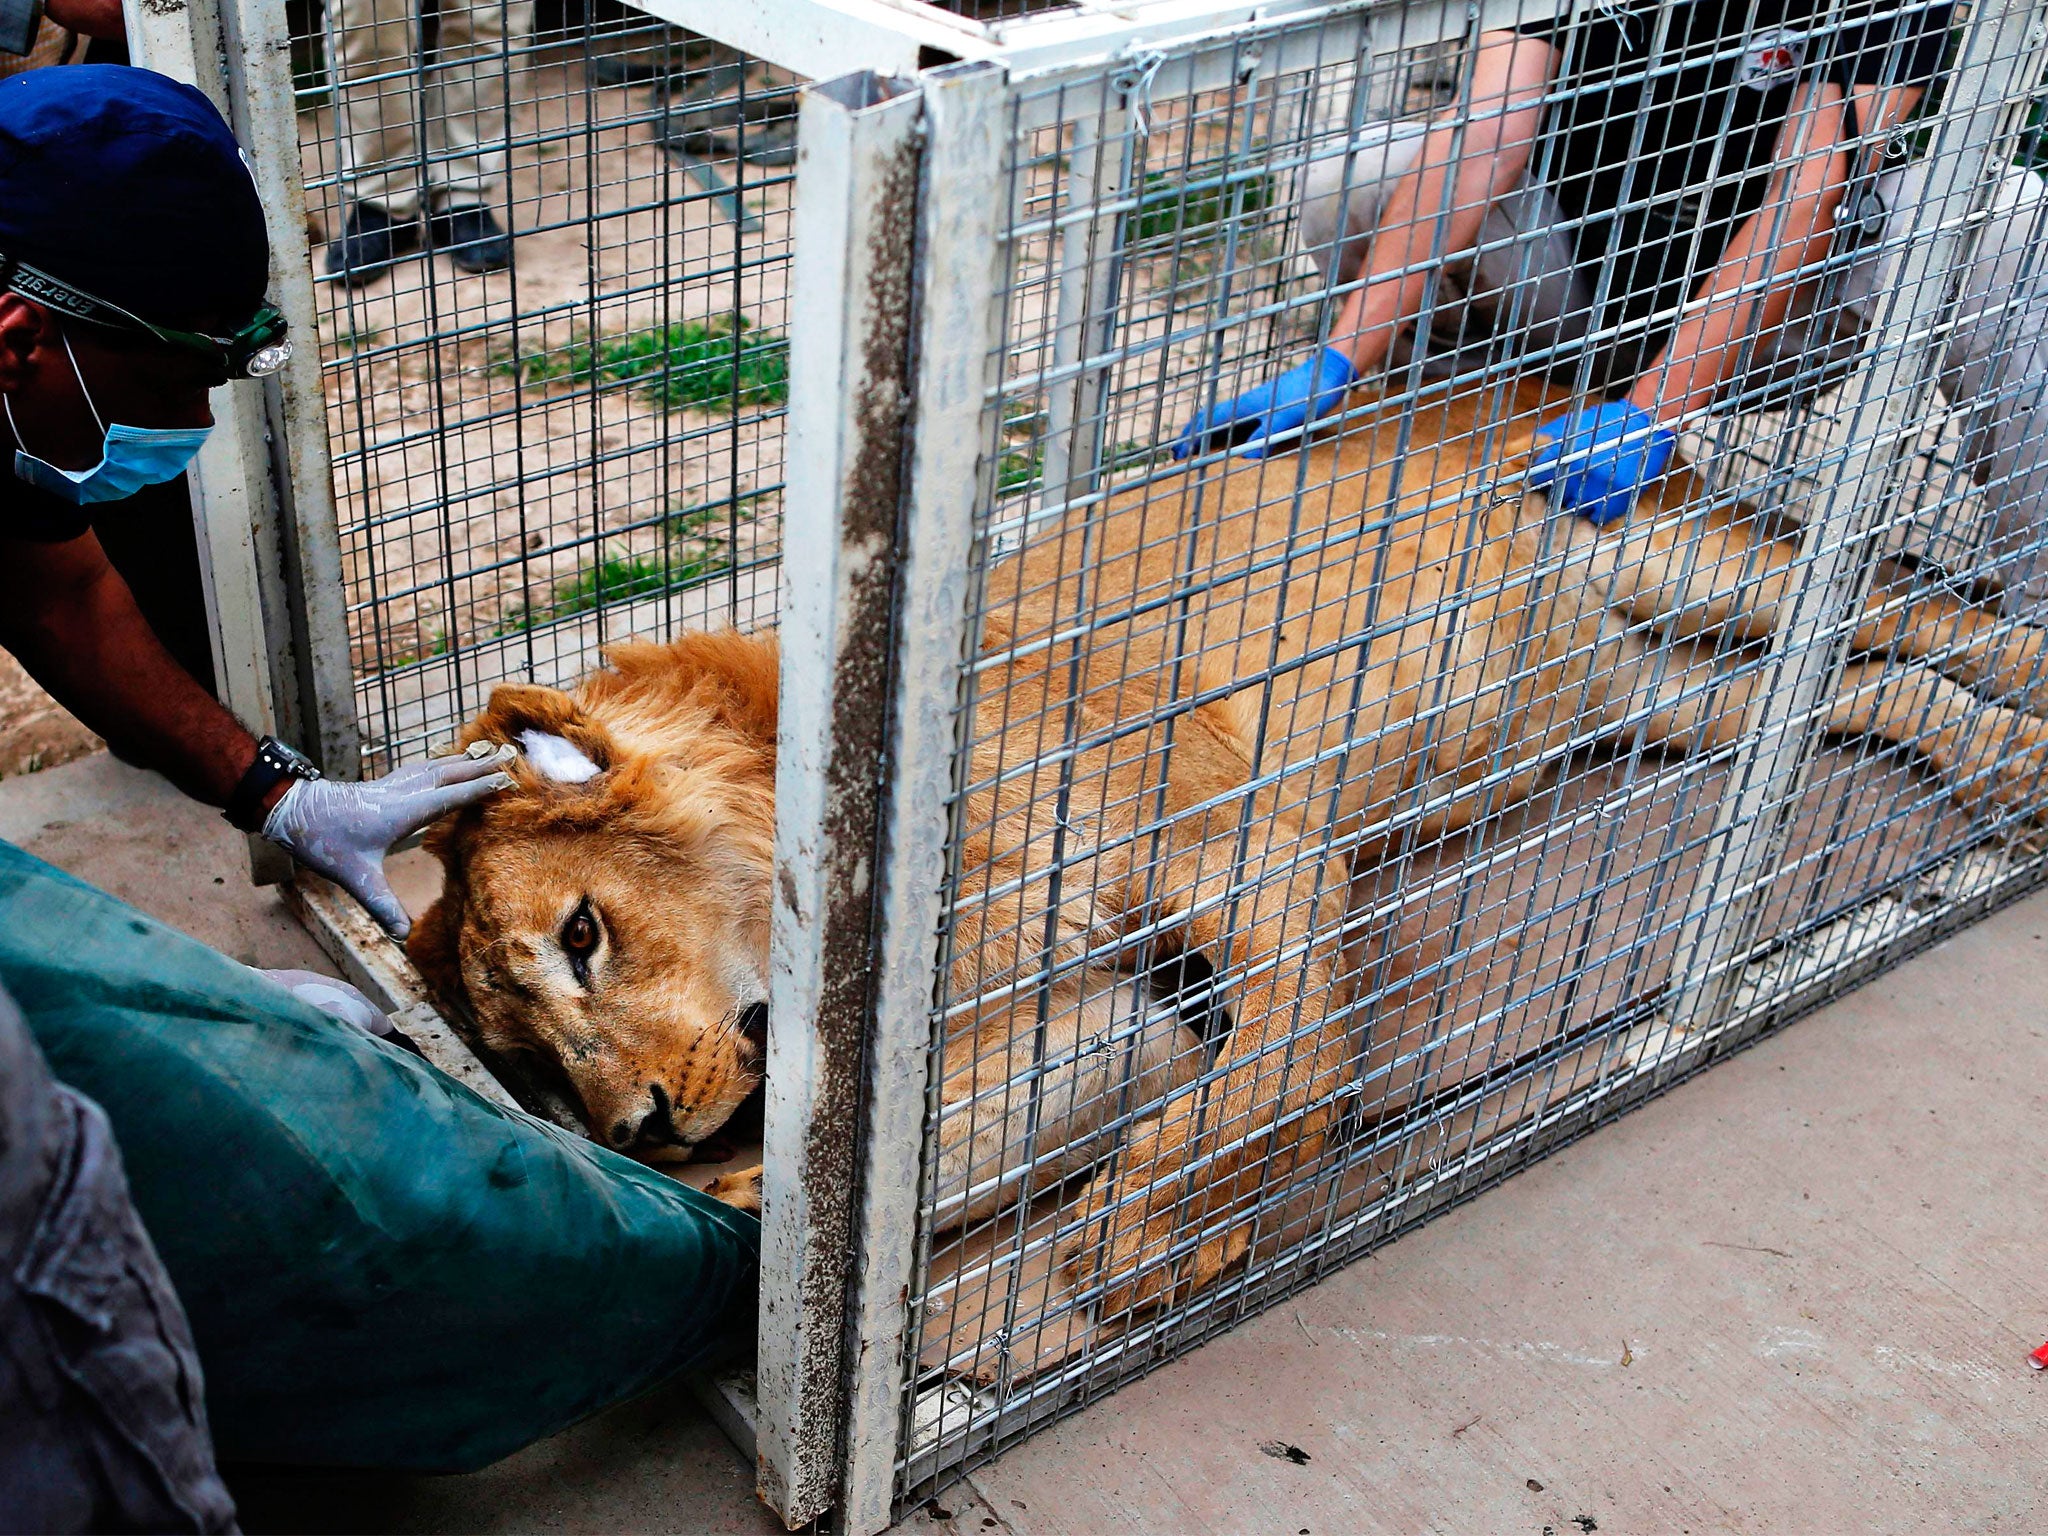 Members of the international animal welfare charity 'Four Paws' treating Simba, a lion abandoned at Muntazah al-Nour zoo in Mosul